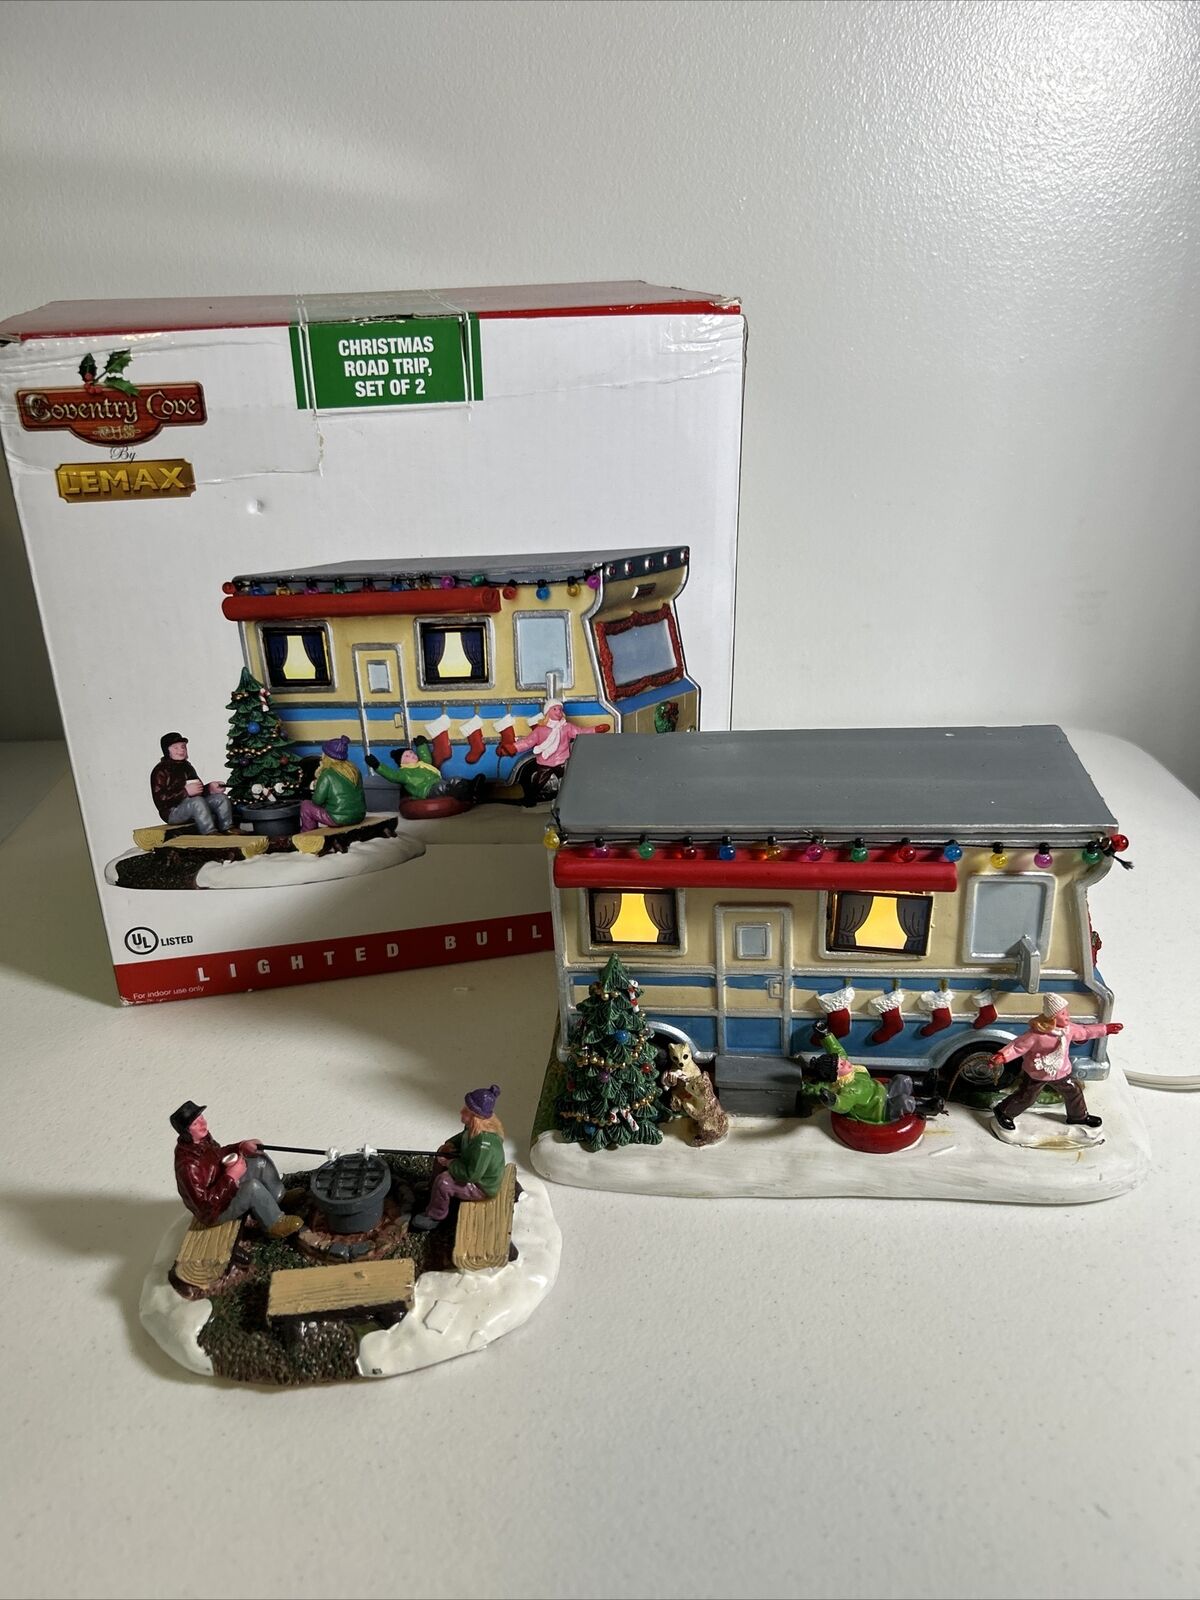 Lemax Coventry Cove Christmas Road Trip 65162 Porcelain Lighted Building